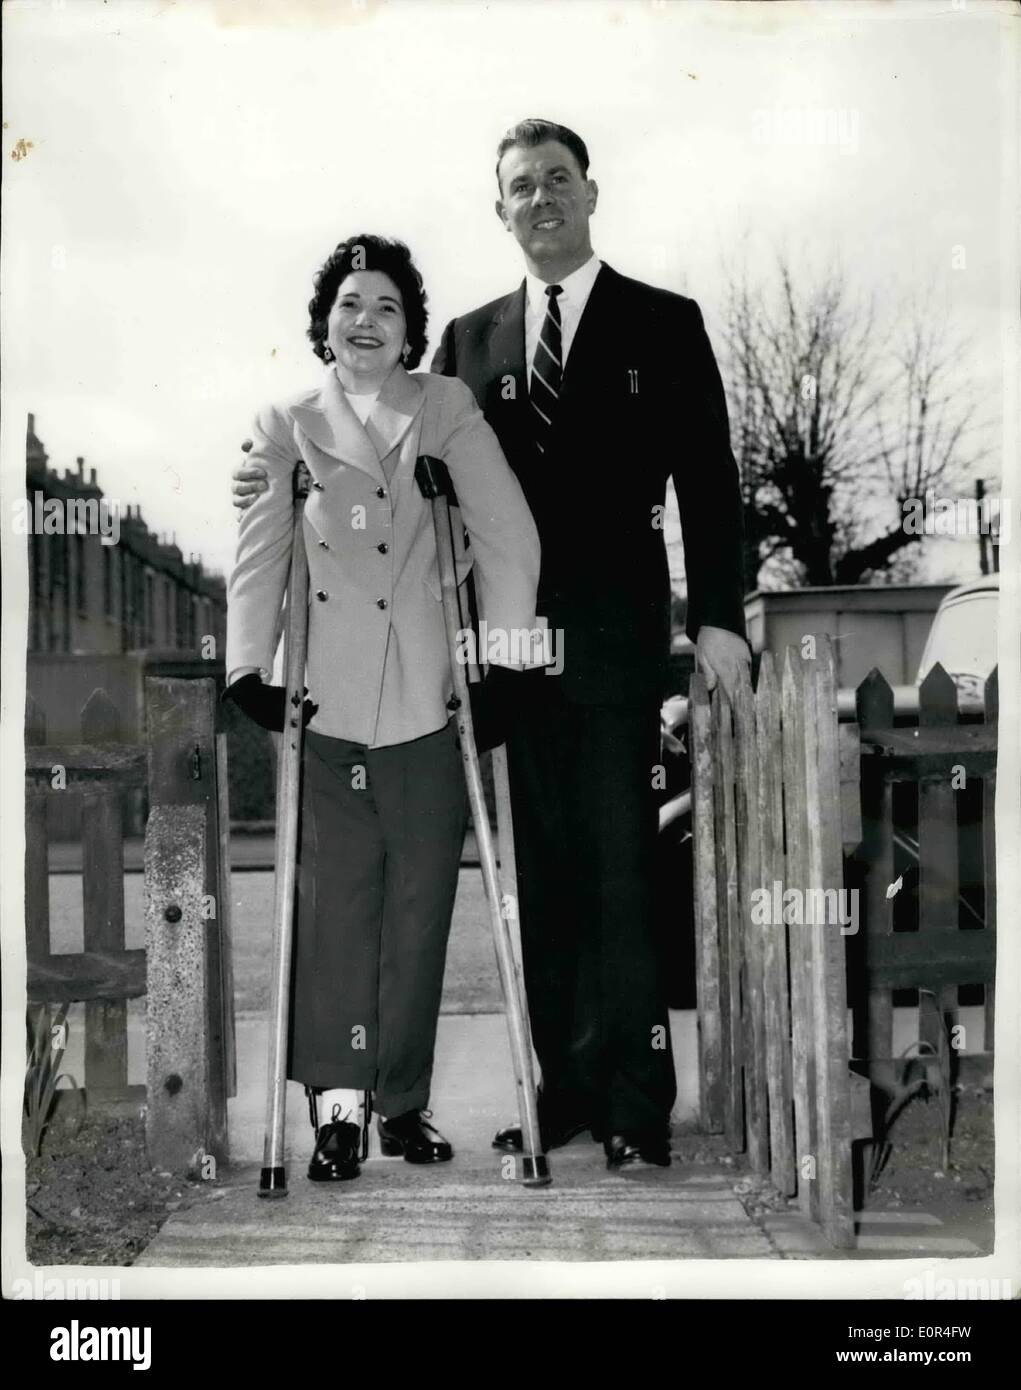 Mar. 03, 1958 - Mrs.Taylor Wins Through And Returns Home For Her First Wedding Anniversary: Mrs. Jo Taylor hobbled up her garden path yesterday or crutches - just 107 days after she was rushed to hospital after the Lewisham train disaster.Doctors said she would be in hospital till April to May, but Mrs. Taylor was determined to be home for her first wedding anniversary on Sunday.Photo Shows Mrs. Jo Taylor accompanied by her husband, Ken, at the garden gate of their home in Penge, London, yesterday. Stock Photo